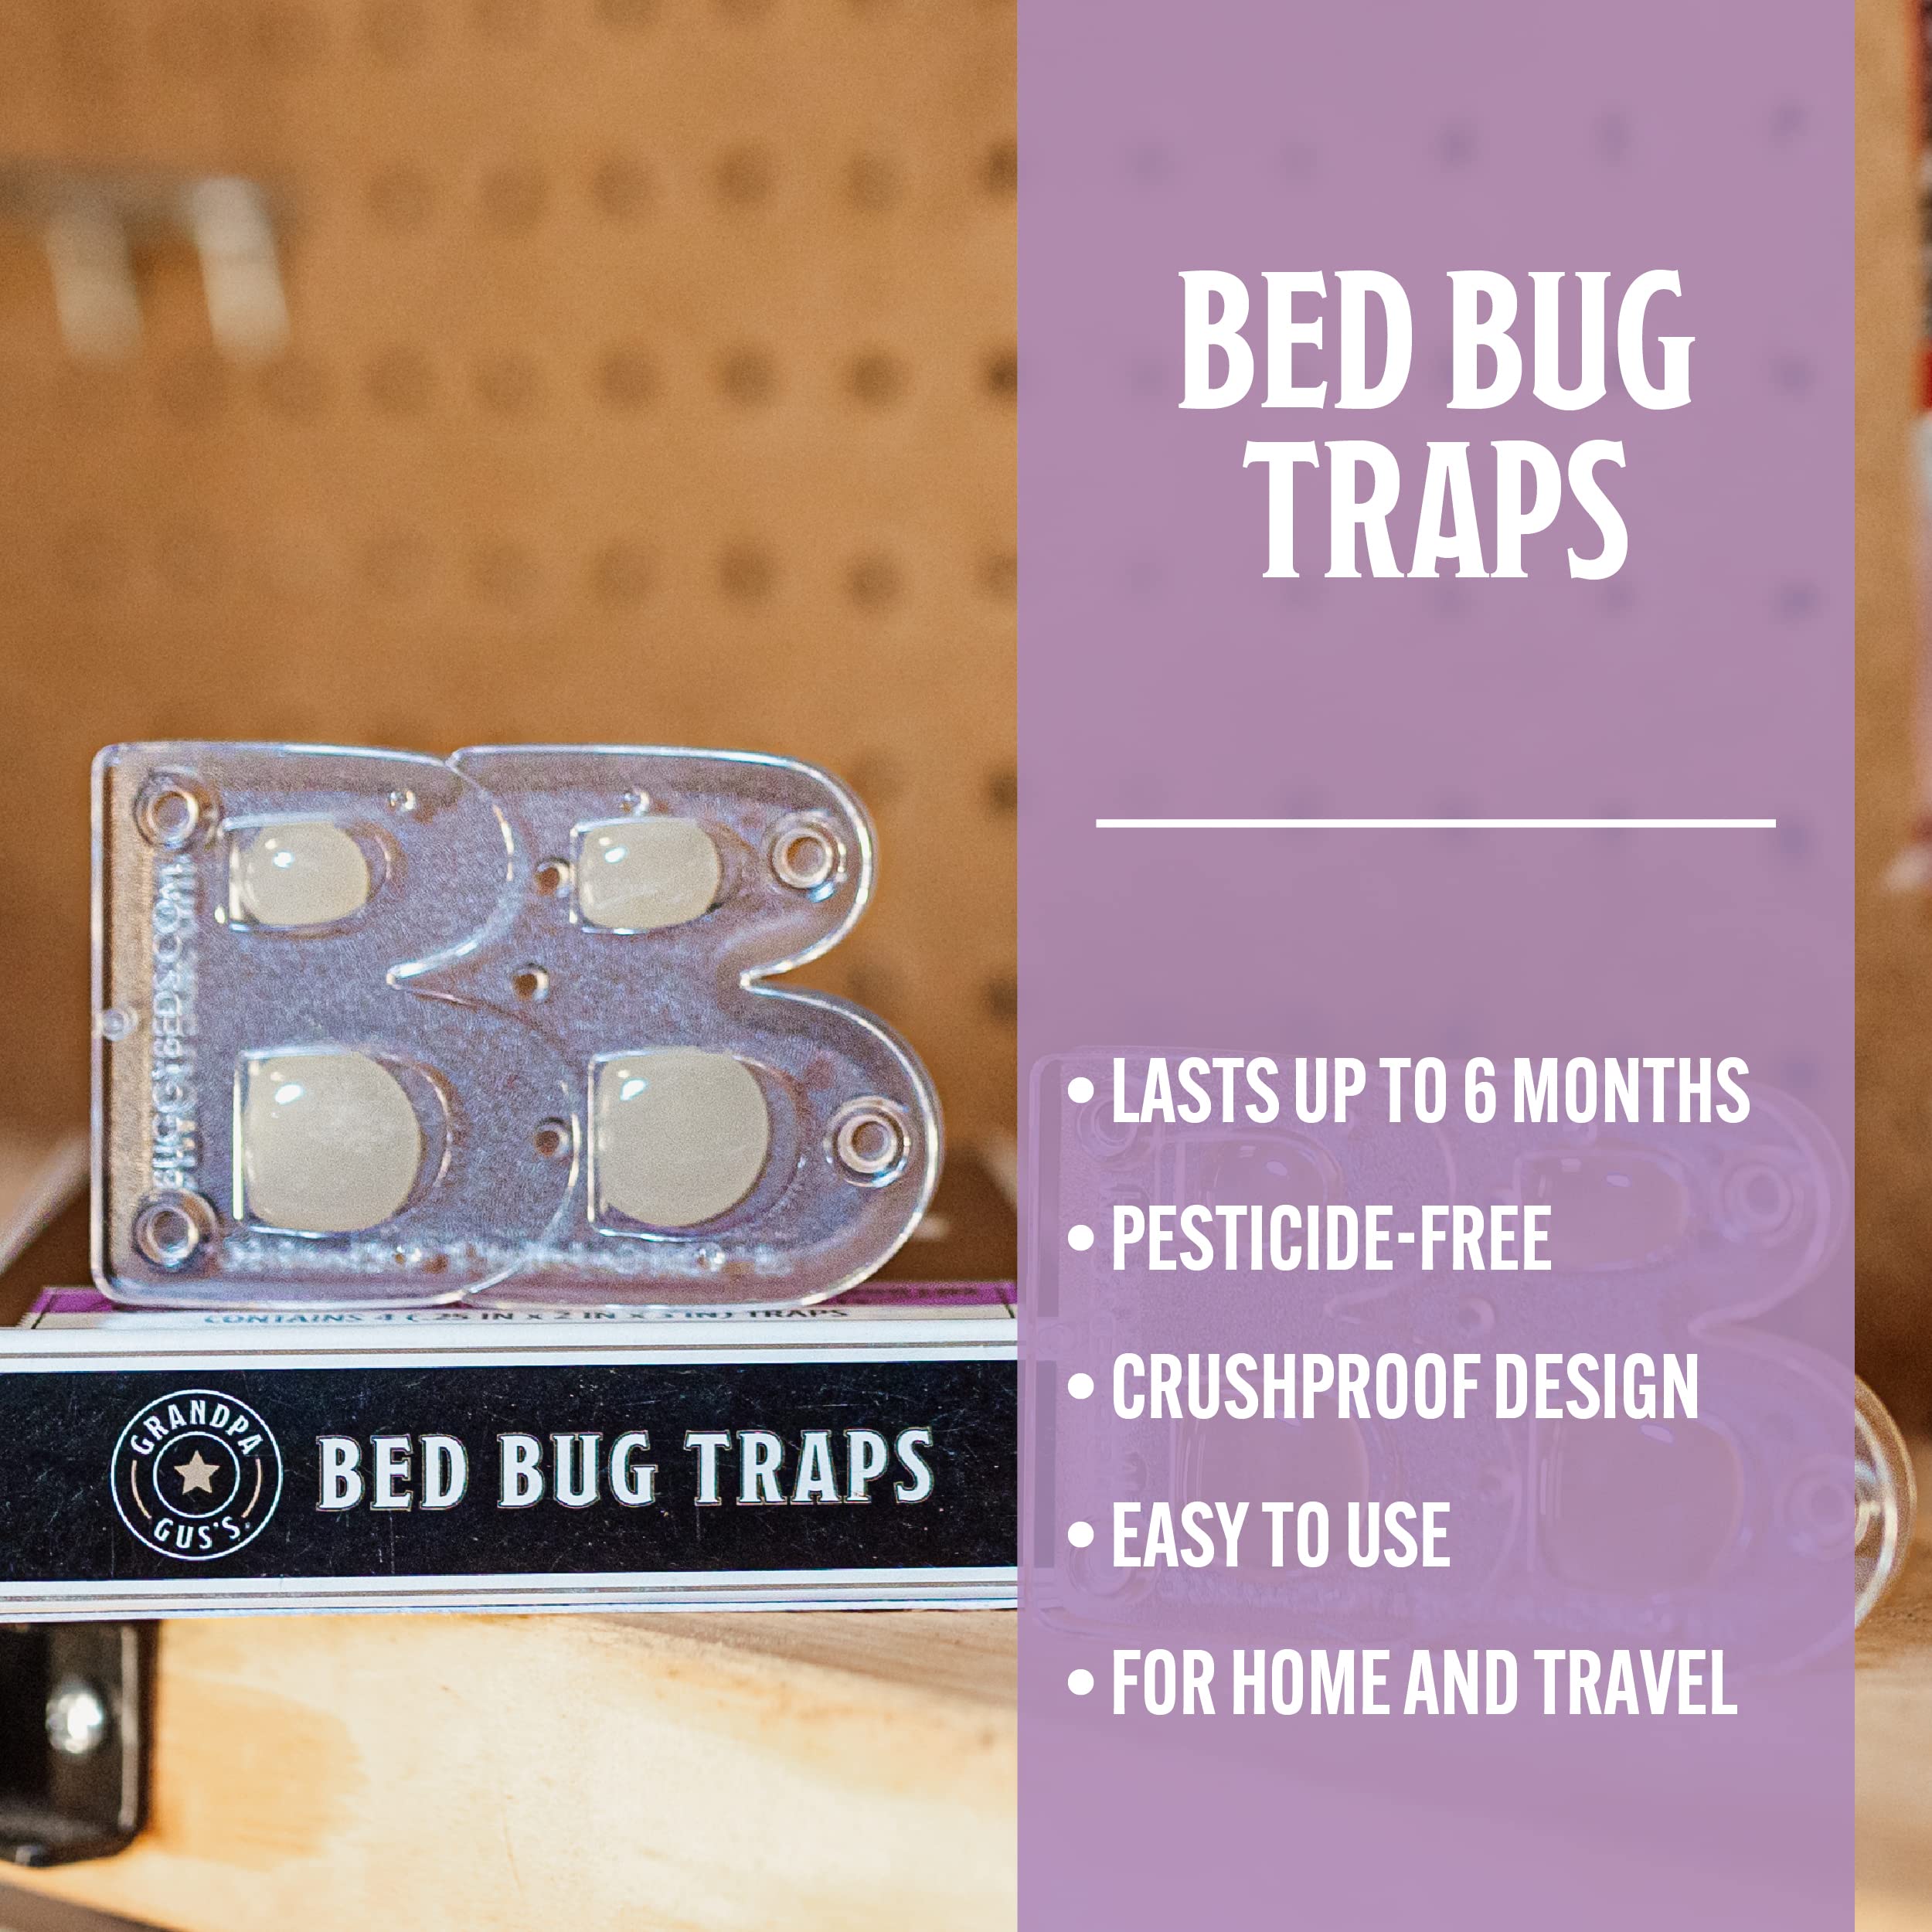 Grandpa Gus's Bed Bug Glue Traps for Home & Travel, Early Detection, Lasts up to 6 Months, Small & Discreet Patented Crush-Proof Design (Pack of 12)